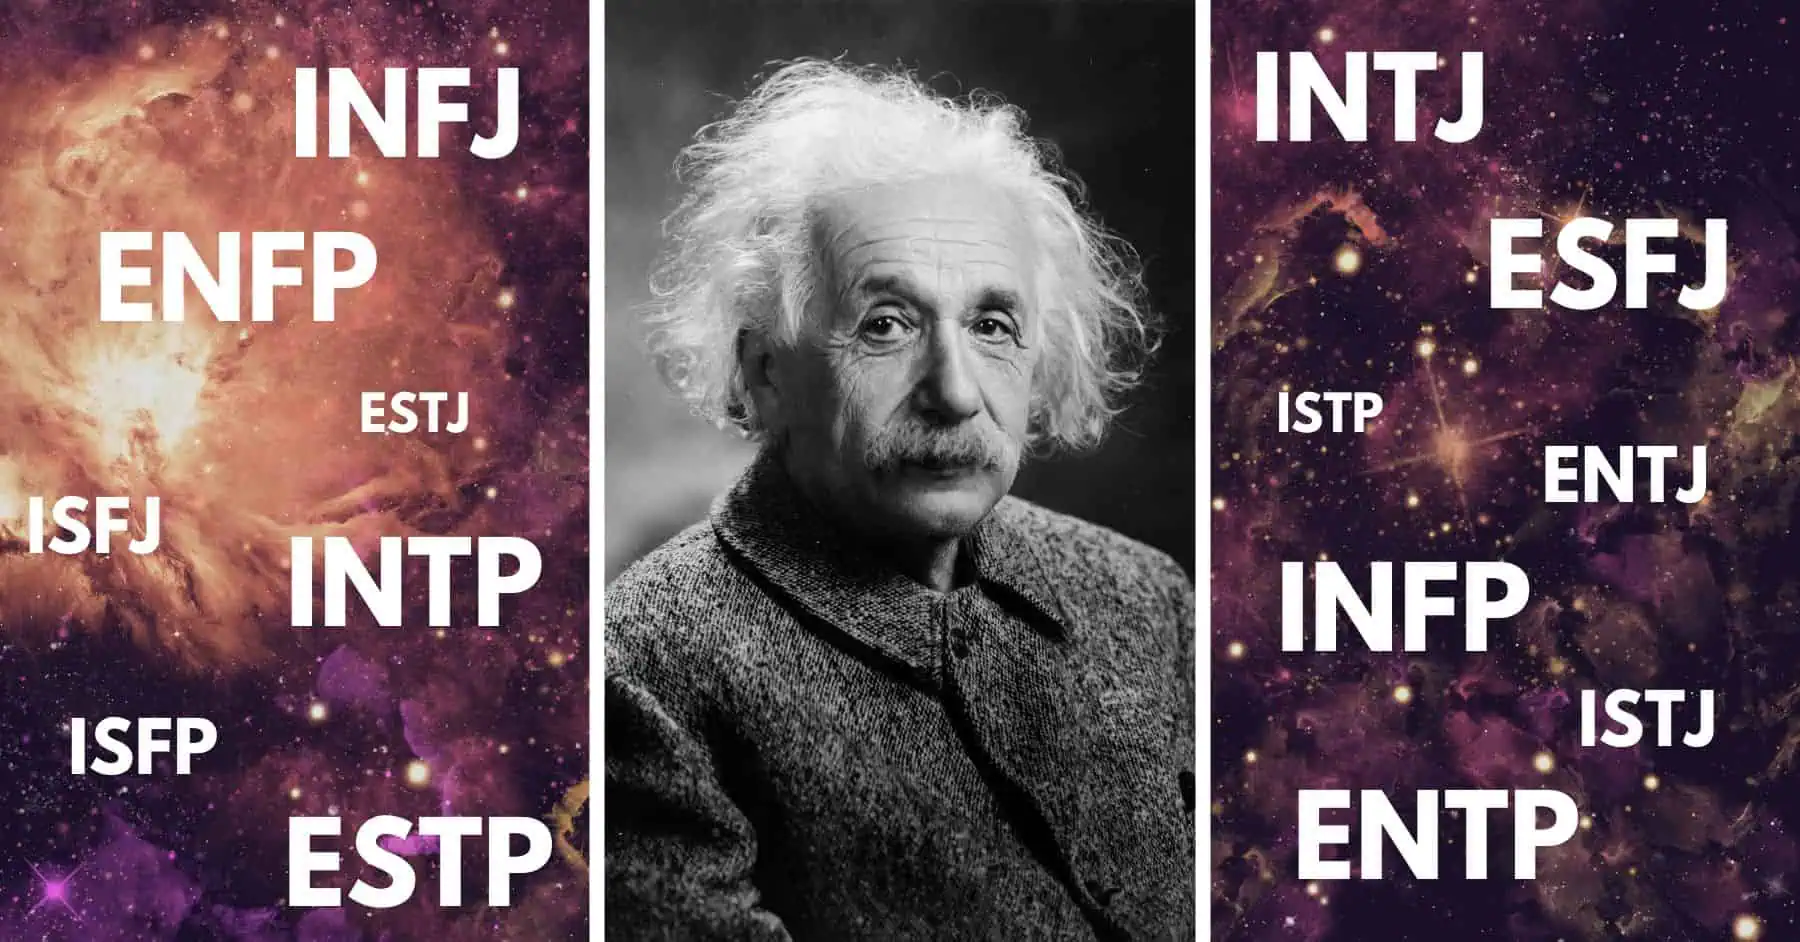 Discover the Albert Einstein quote that will be most relatable to your Myers-Briggs personality type! #MBTI #Personality #INTJ